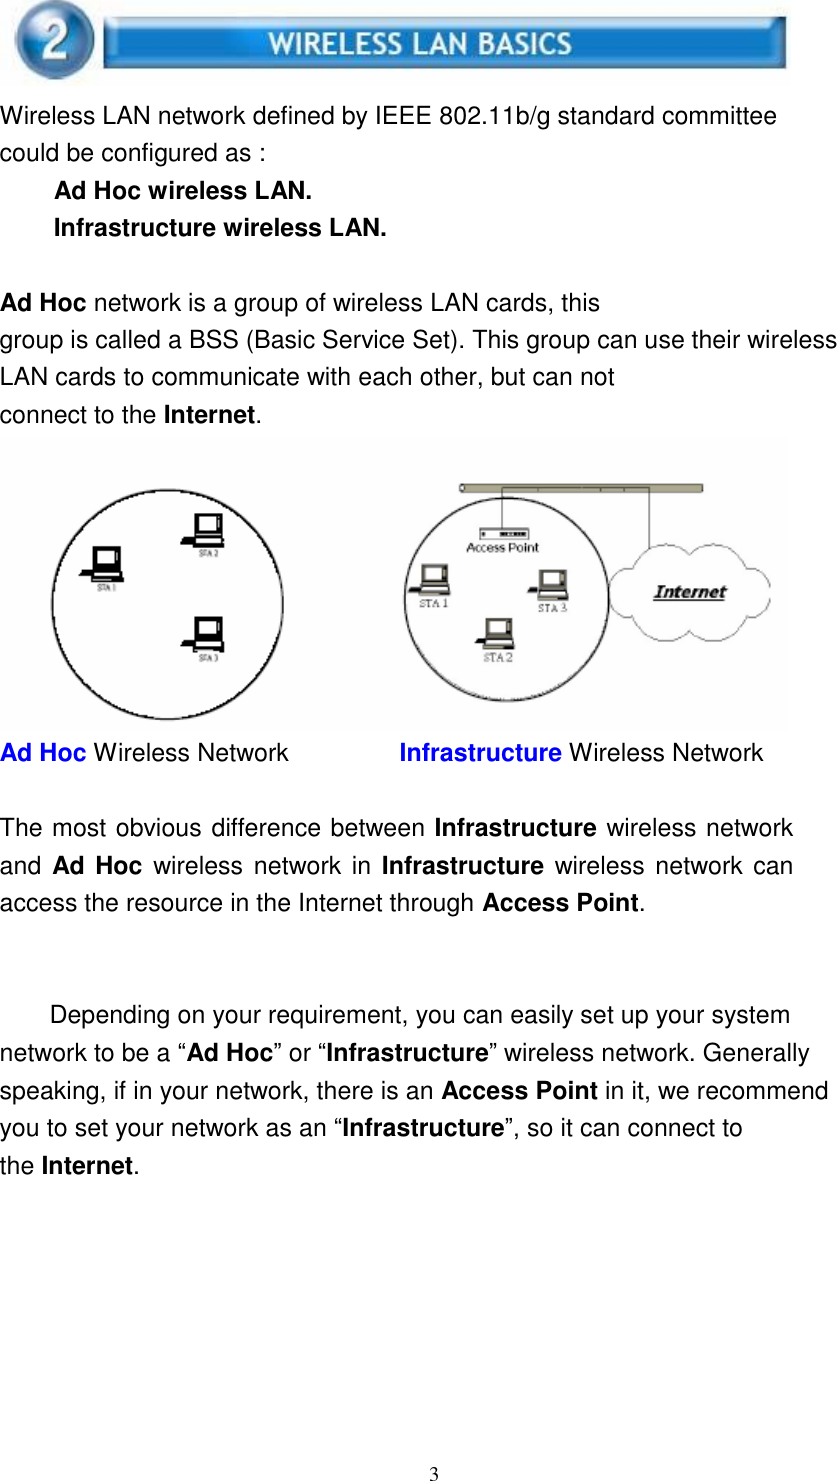 3       Wireless LAN network defined by IEEE 802.11b/g standard committee could be configured as : Ad Hoc wireless LAN. Infrastructure wireless LAN.   Ad Hoc network is a group of wireless LAN cards, this group is called a BSS (Basic Service Set). This group can use their wireless LAN cards to communicate with each other, but can not connect to the Internet.  Ad Hoc Wireless Network  Infrastructure Wireless Network   The most obvious difference between Infrastructure wireless network and Ad Hoc wireless network in Infrastructure wireless network can access the resource in the Internet through Access Point.     Depending on your requirement, you can easily set up your system network to be a “Ad Hoc” or “Infrastructure” wireless network. Generally speaking, if in your network, there is an Access Point in it, we recommend you to set your network as an “Infrastructure”, so it can connect to the Internet. 